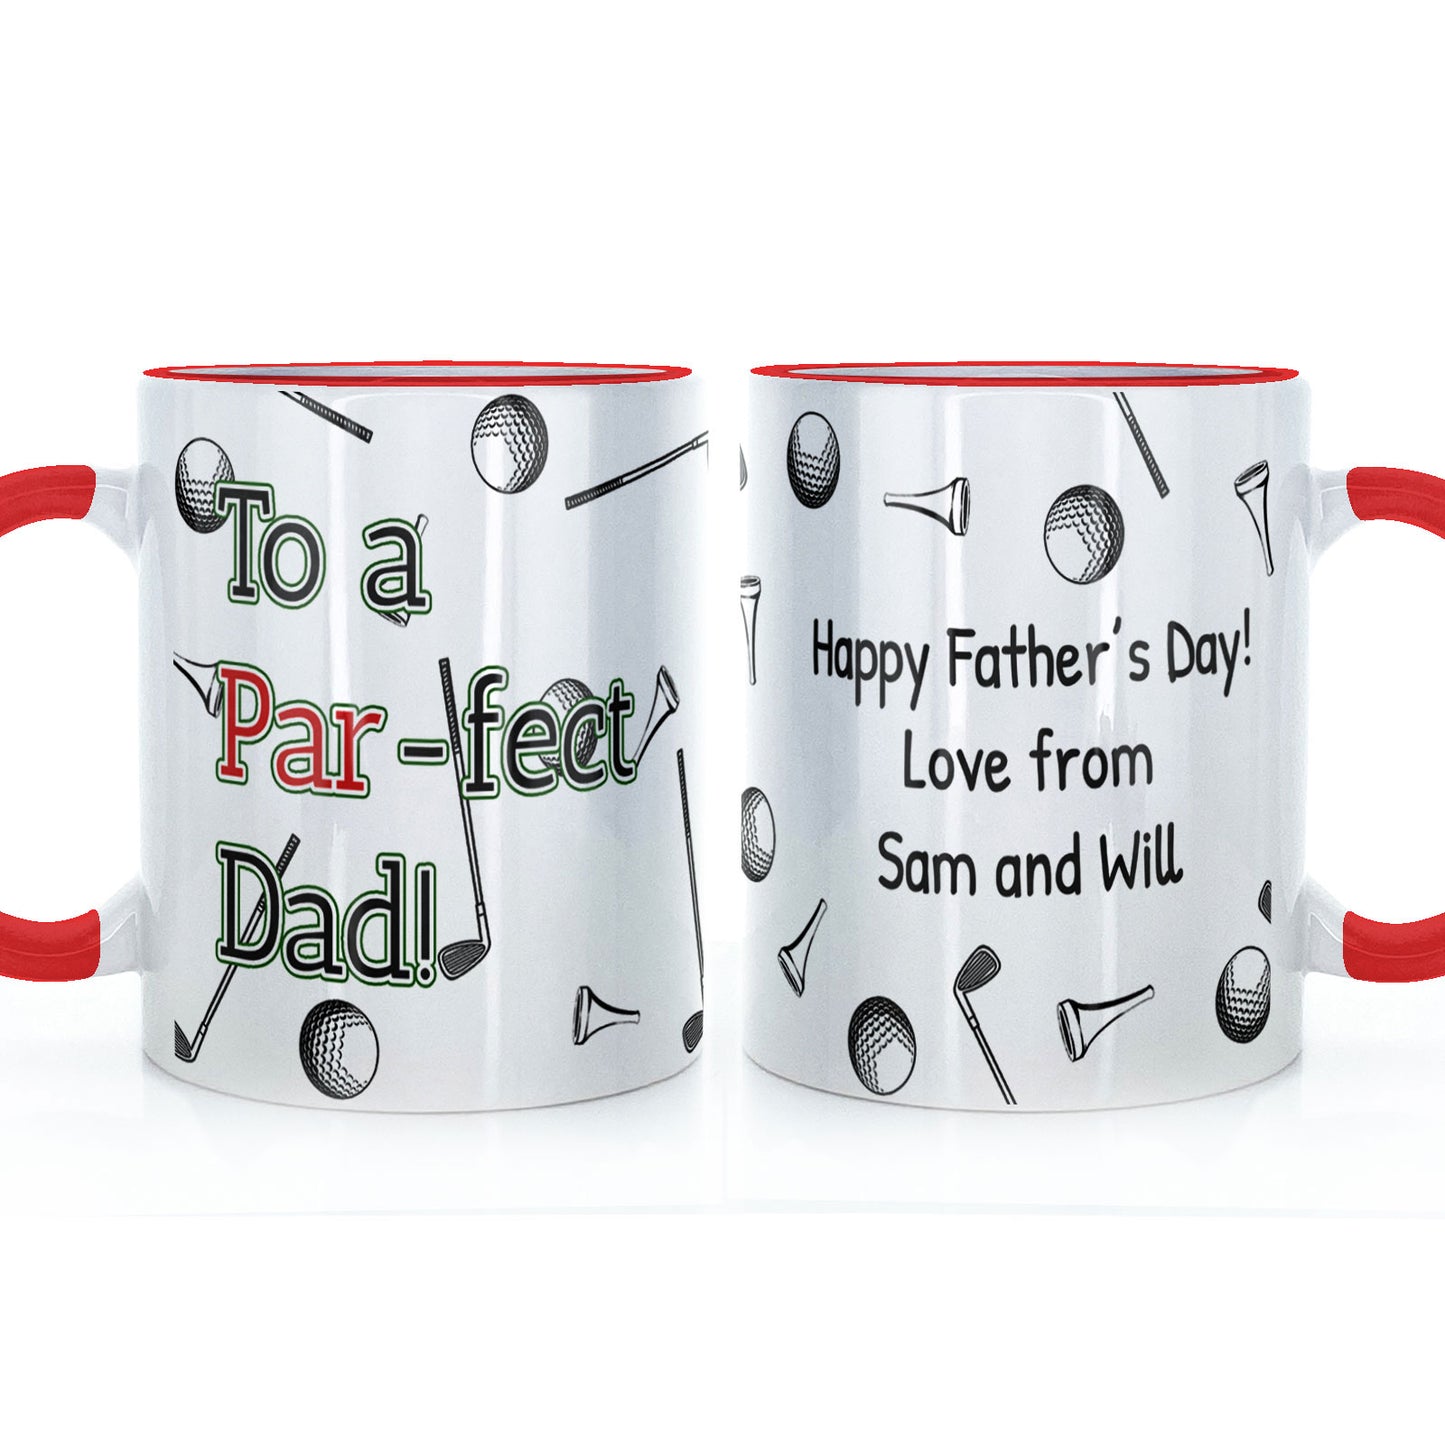 Personalised Father's Day Mug - Golfing Par-fect Dad